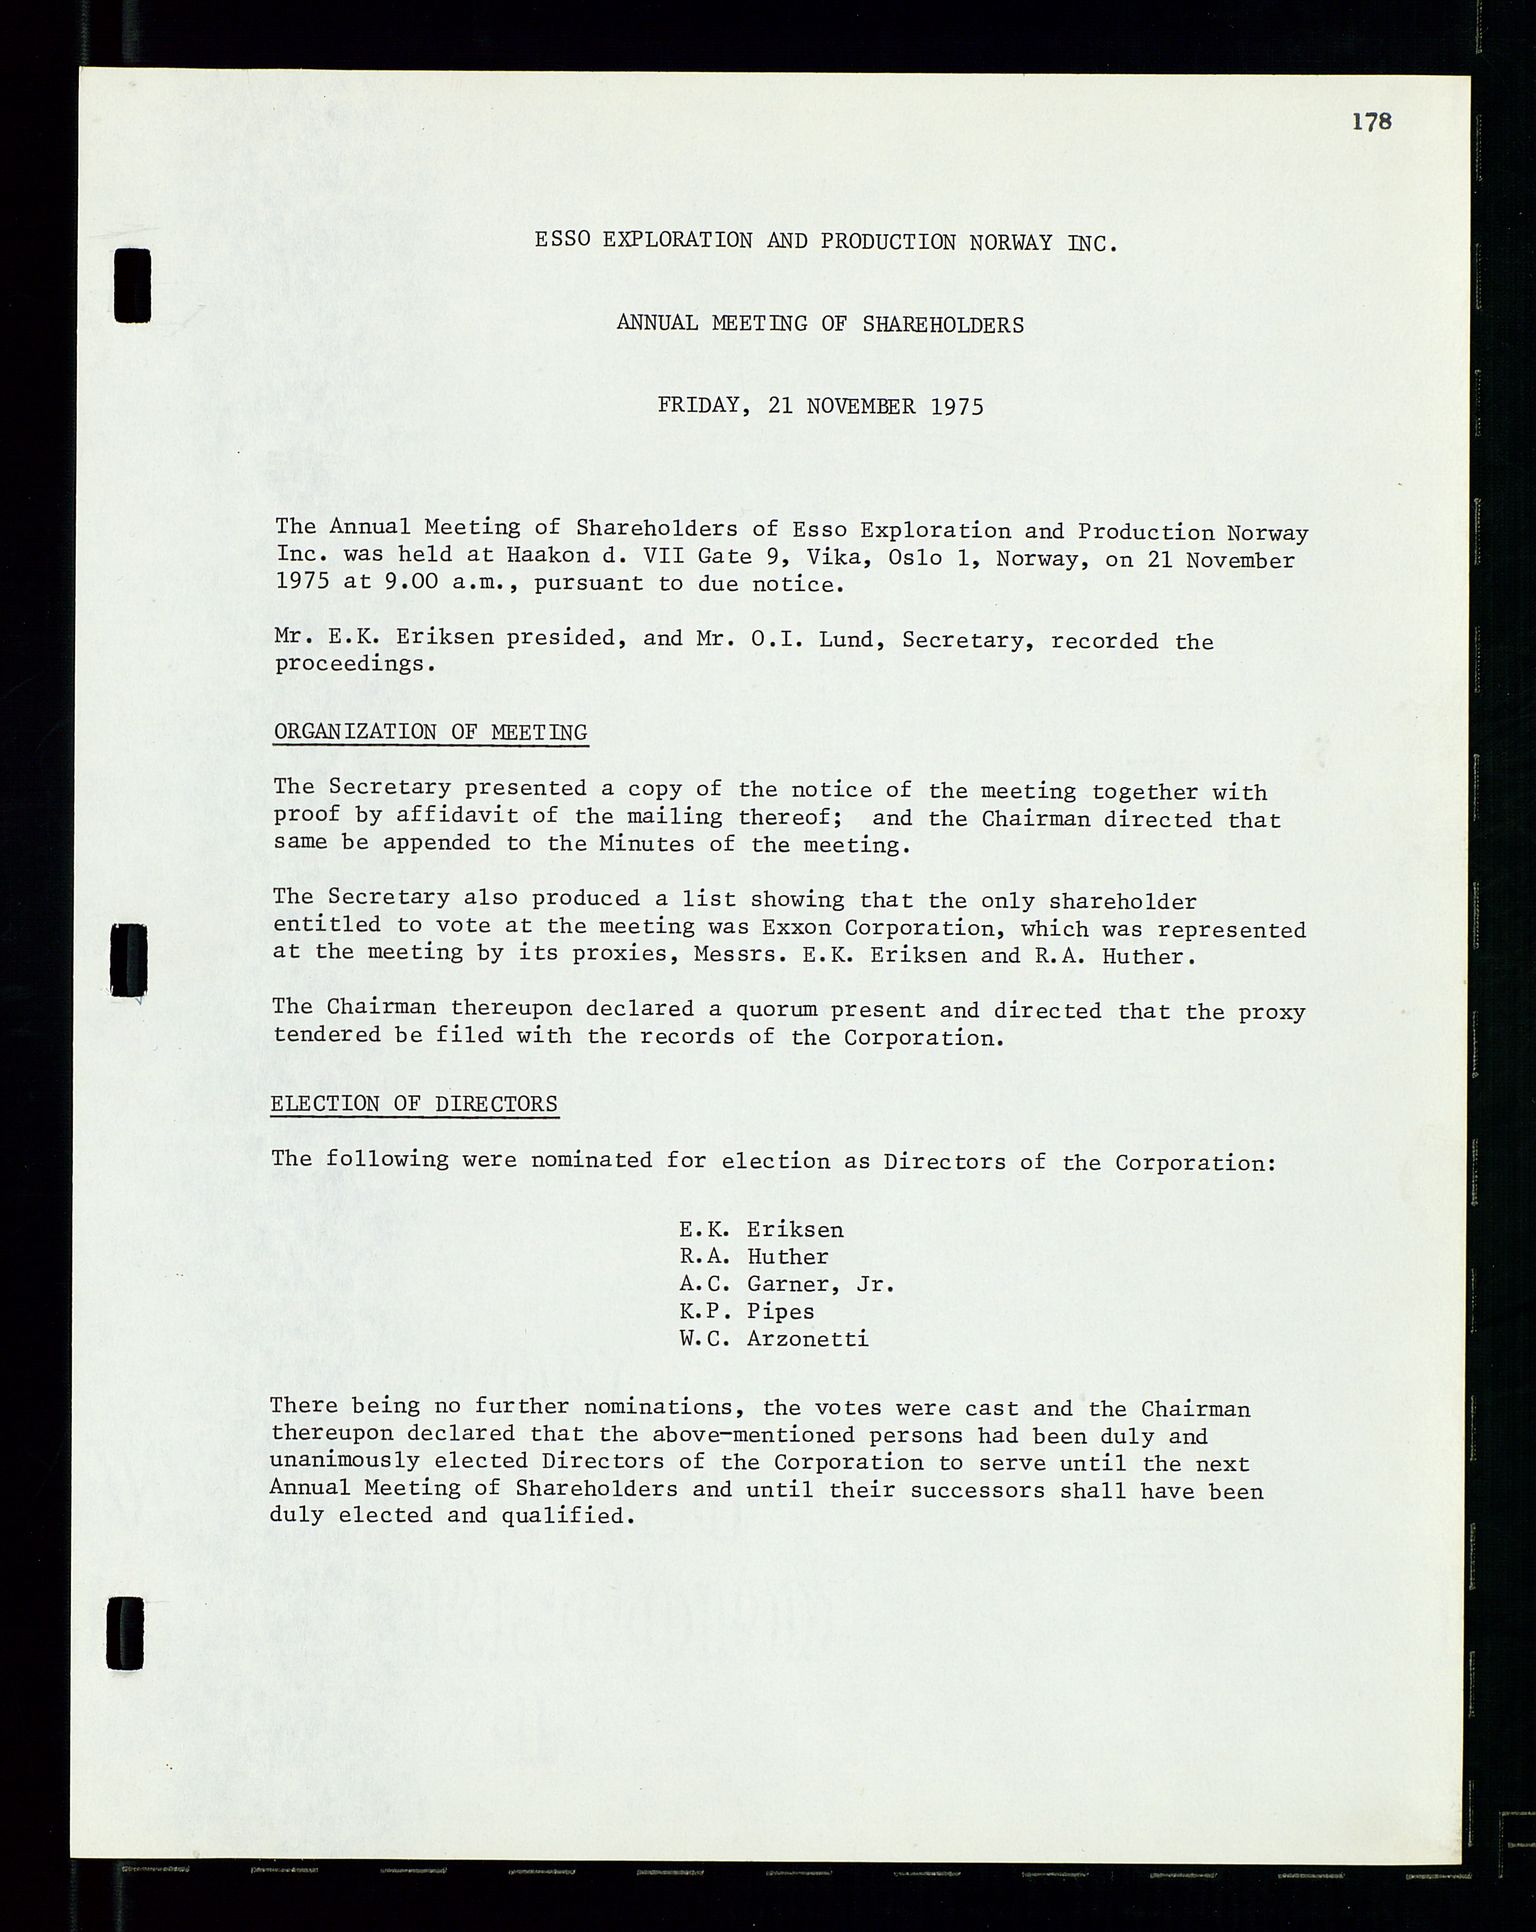 Pa 1512 - Esso Exploration and Production Norway Inc., SAST/A-101917/A/Aa/L0001/0002: Styredokumenter / Corporate records, Board meeting minutes, Agreements, Stocholder meetings, 1975-1979, s. 9